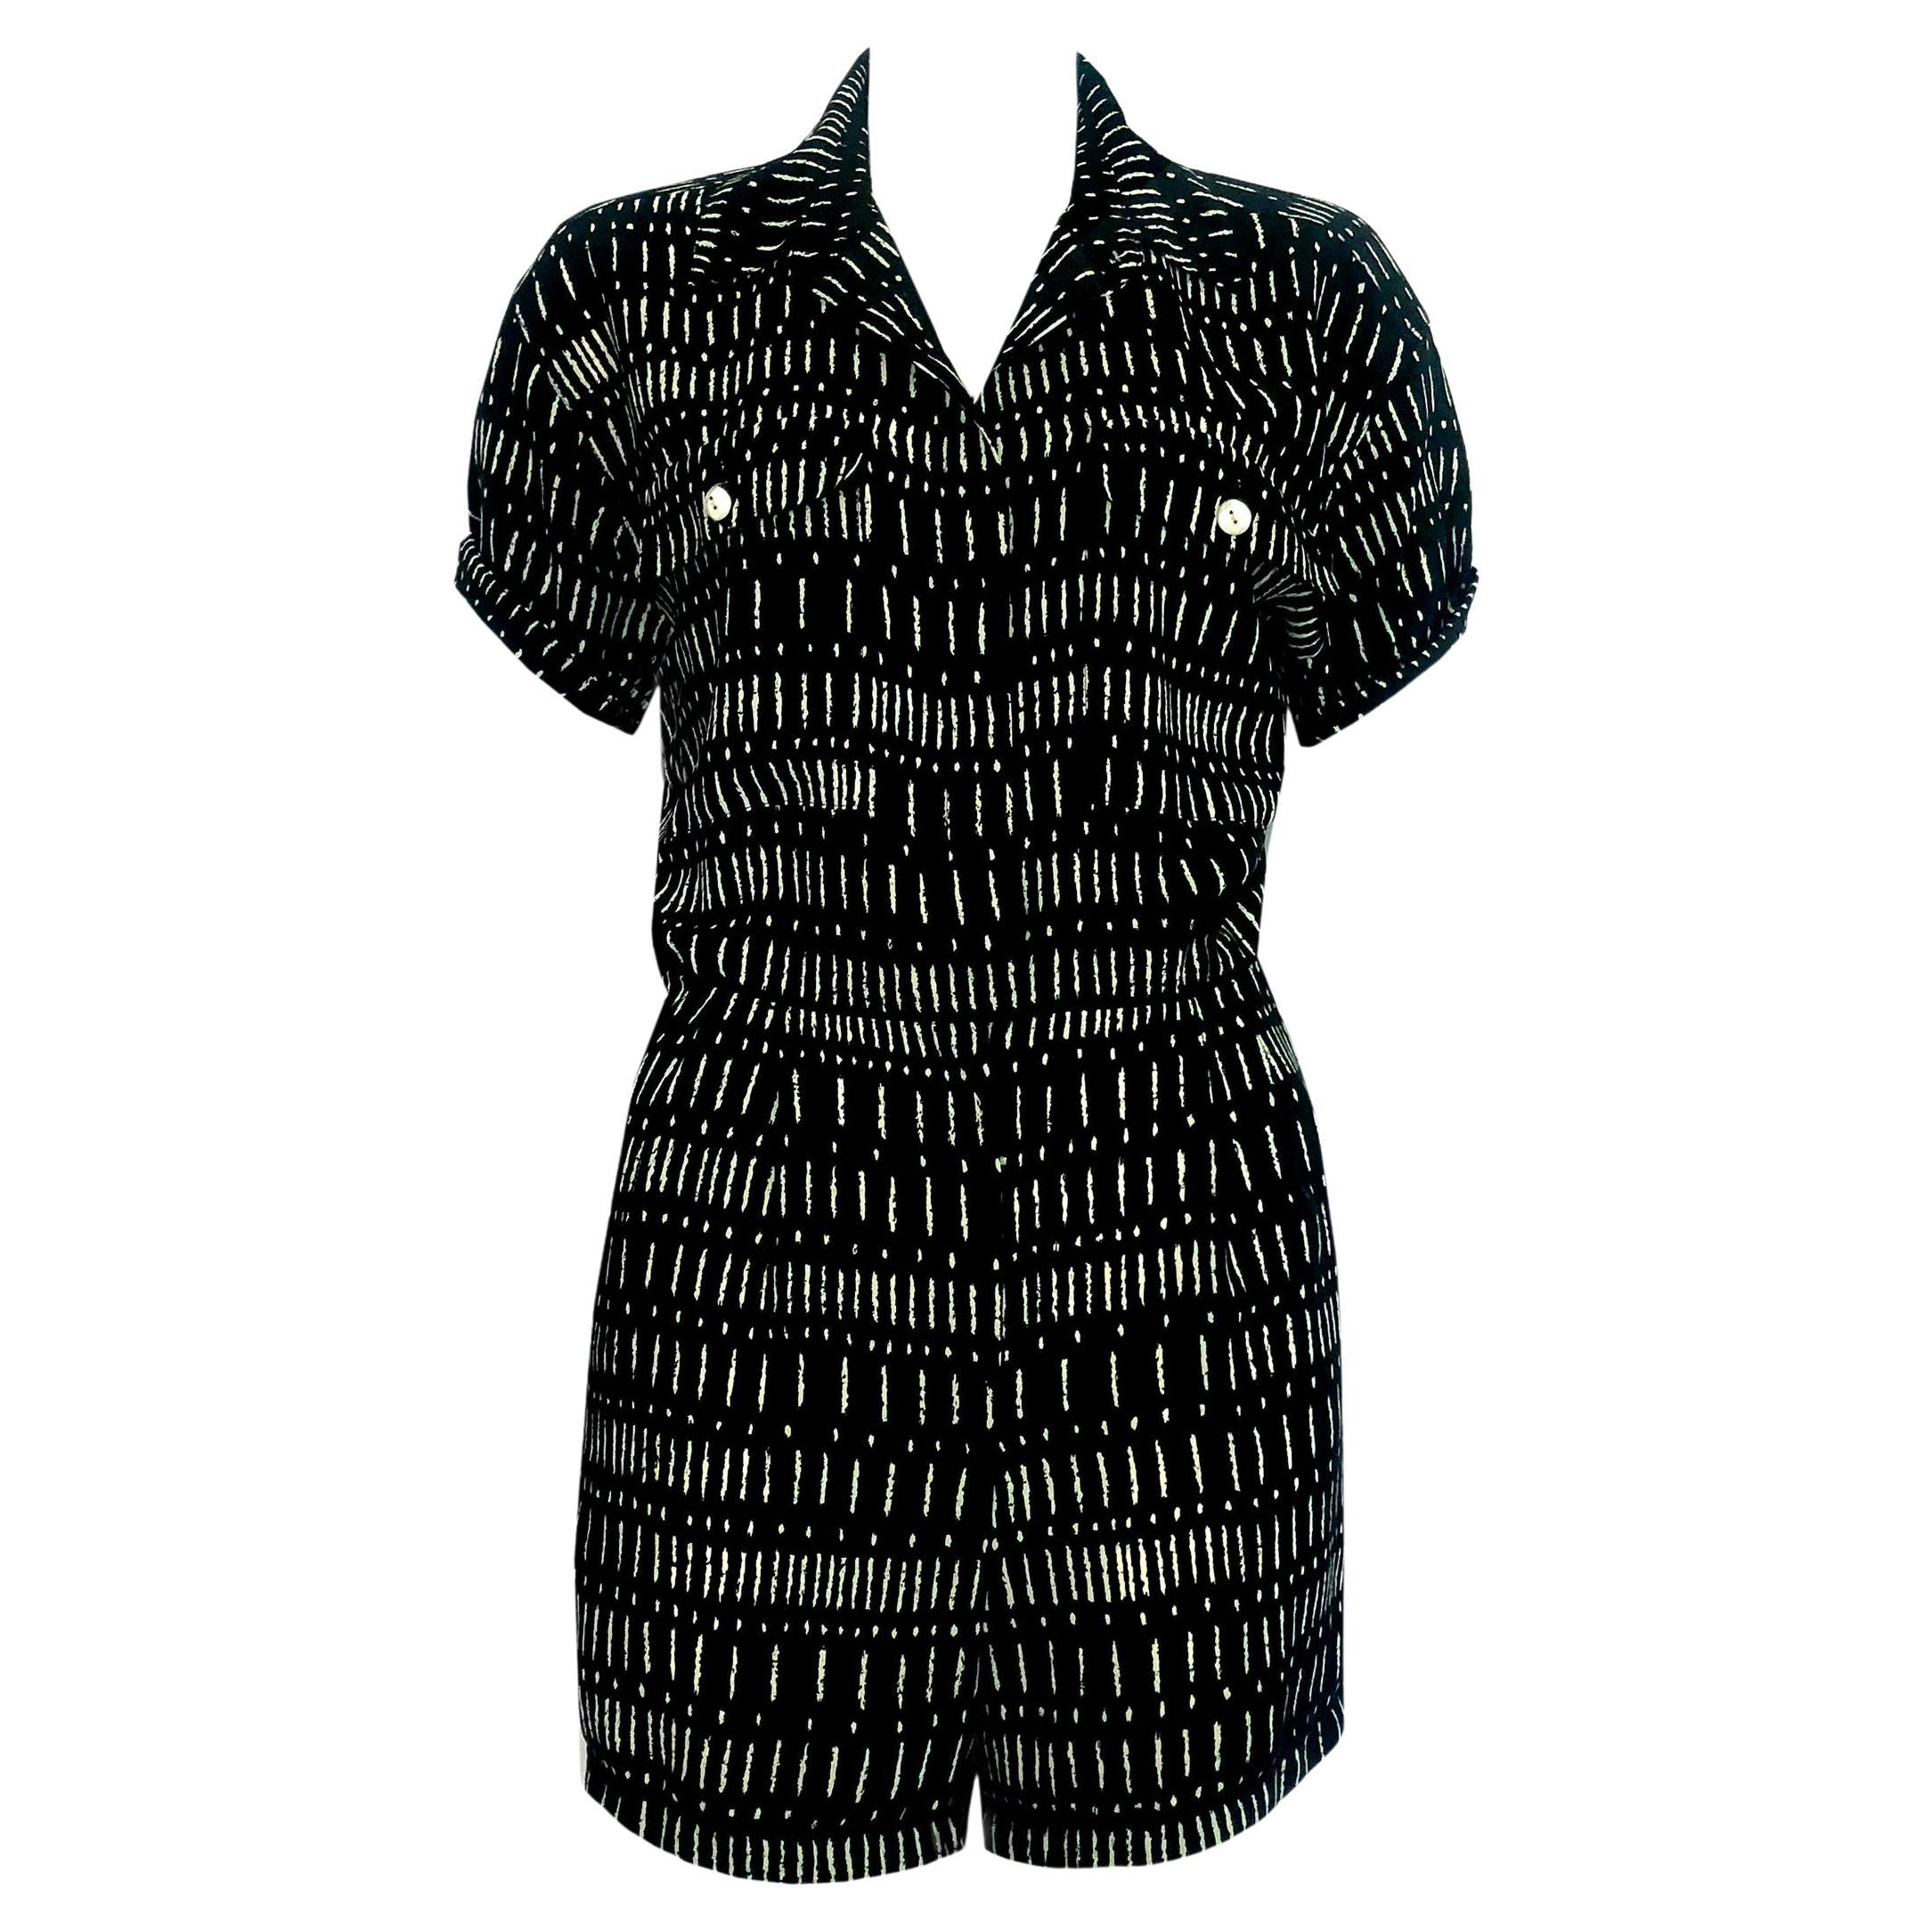 1980s Vintage Playsuit - Black & White Abstract Print - Pockets Details For Sale